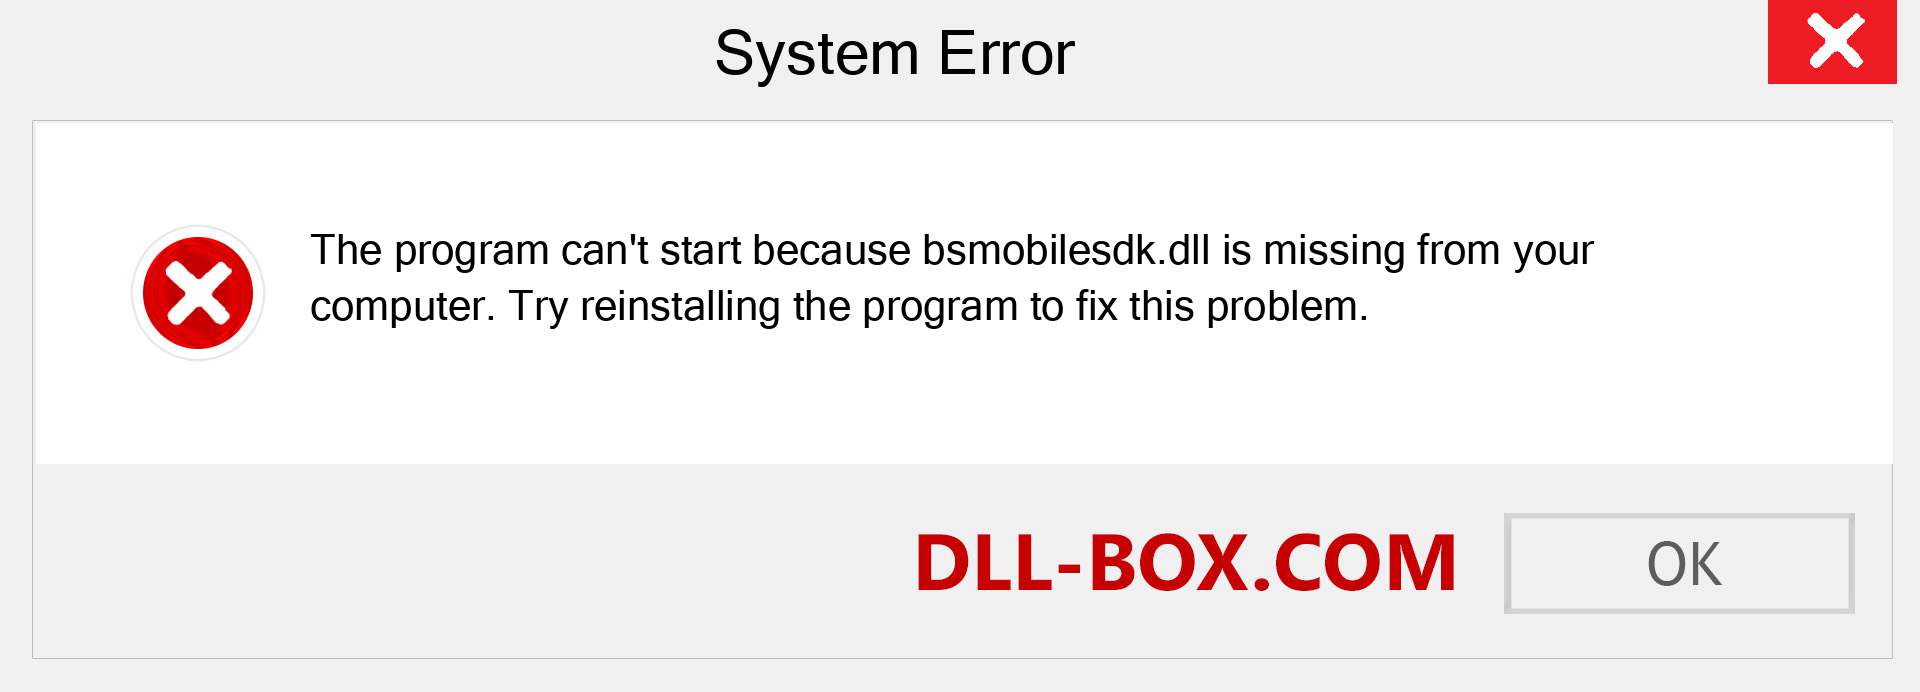  bsmobilesdk.dll file is missing?. Download for Windows 7, 8, 10 - Fix  bsmobilesdk dll Missing Error on Windows, photos, images